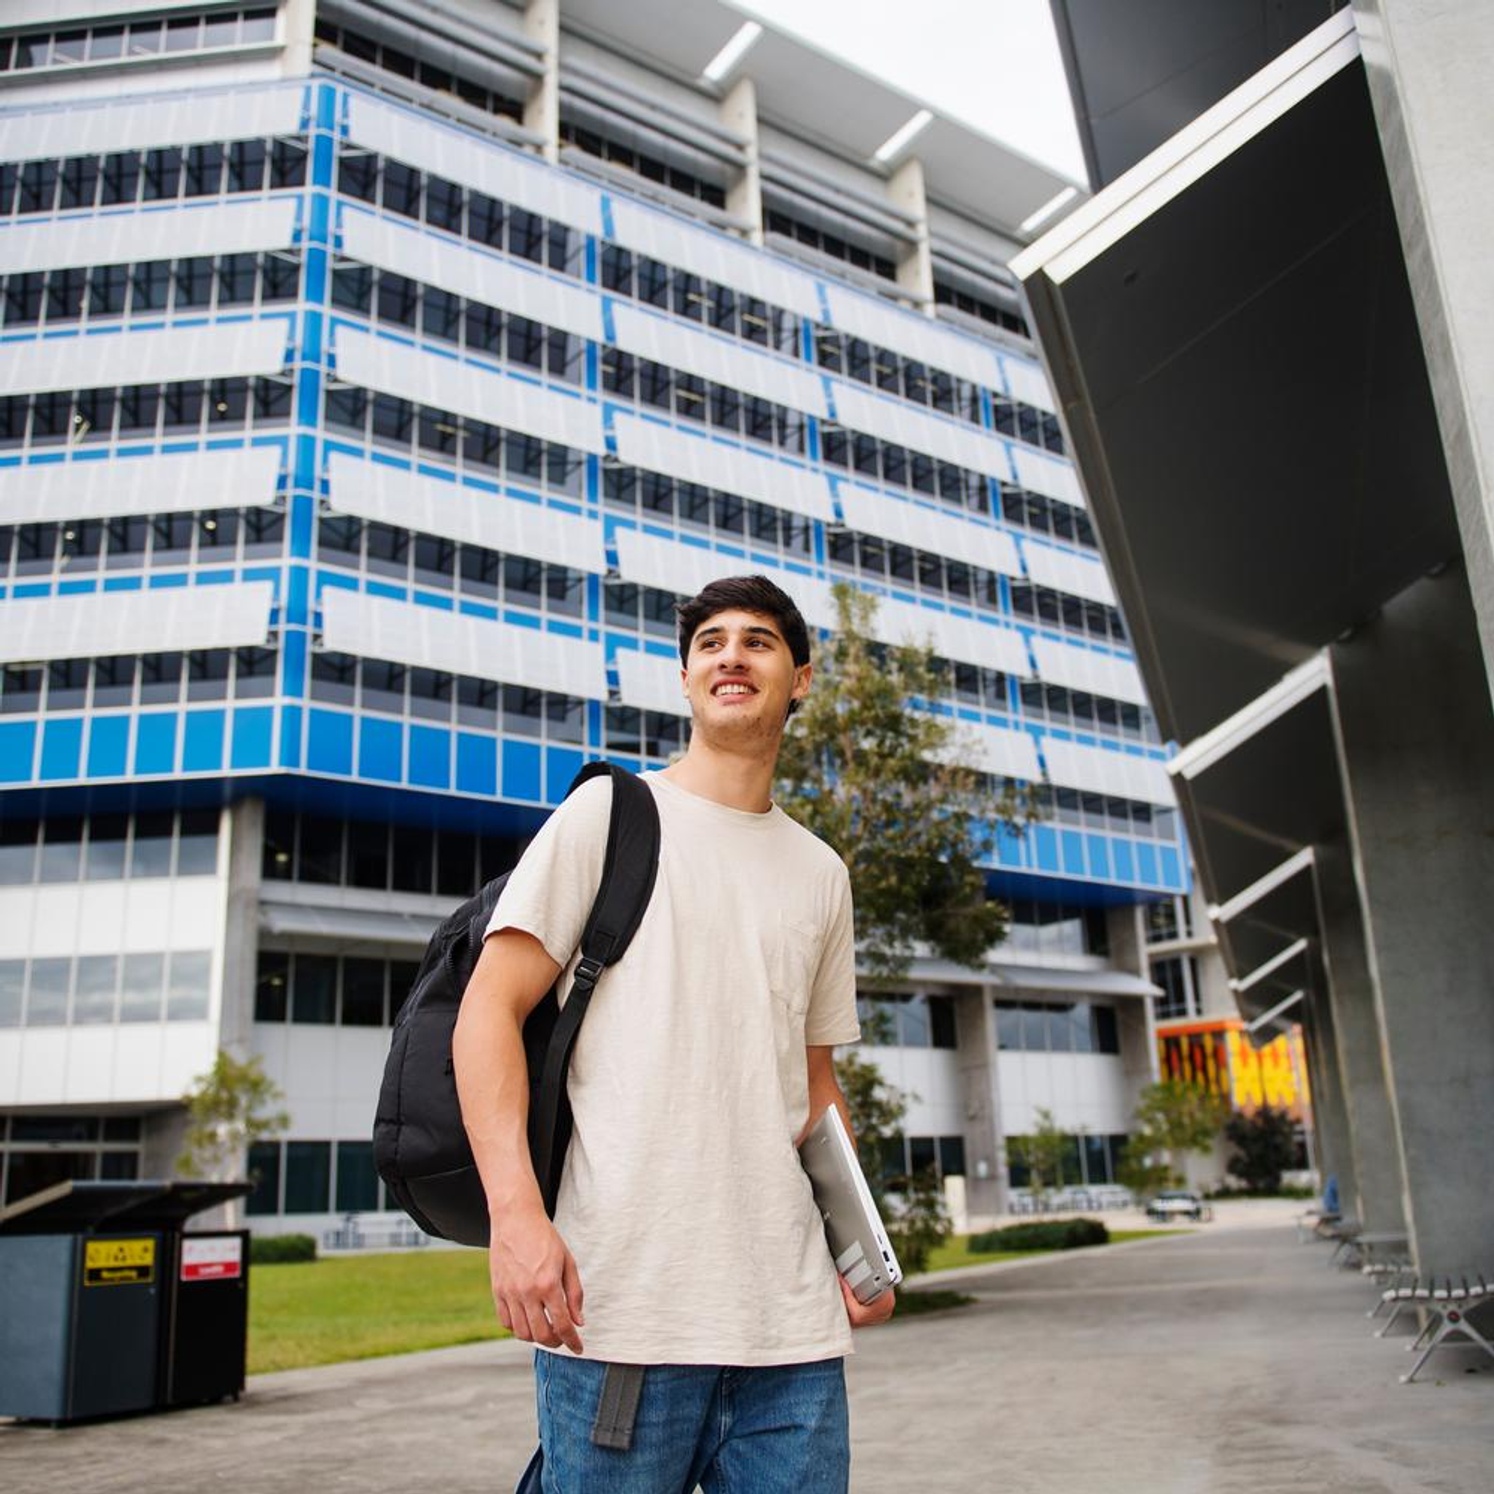 Davi Algranti is a Bachelor of Business and Enterprise student at the Gold Coast campus.